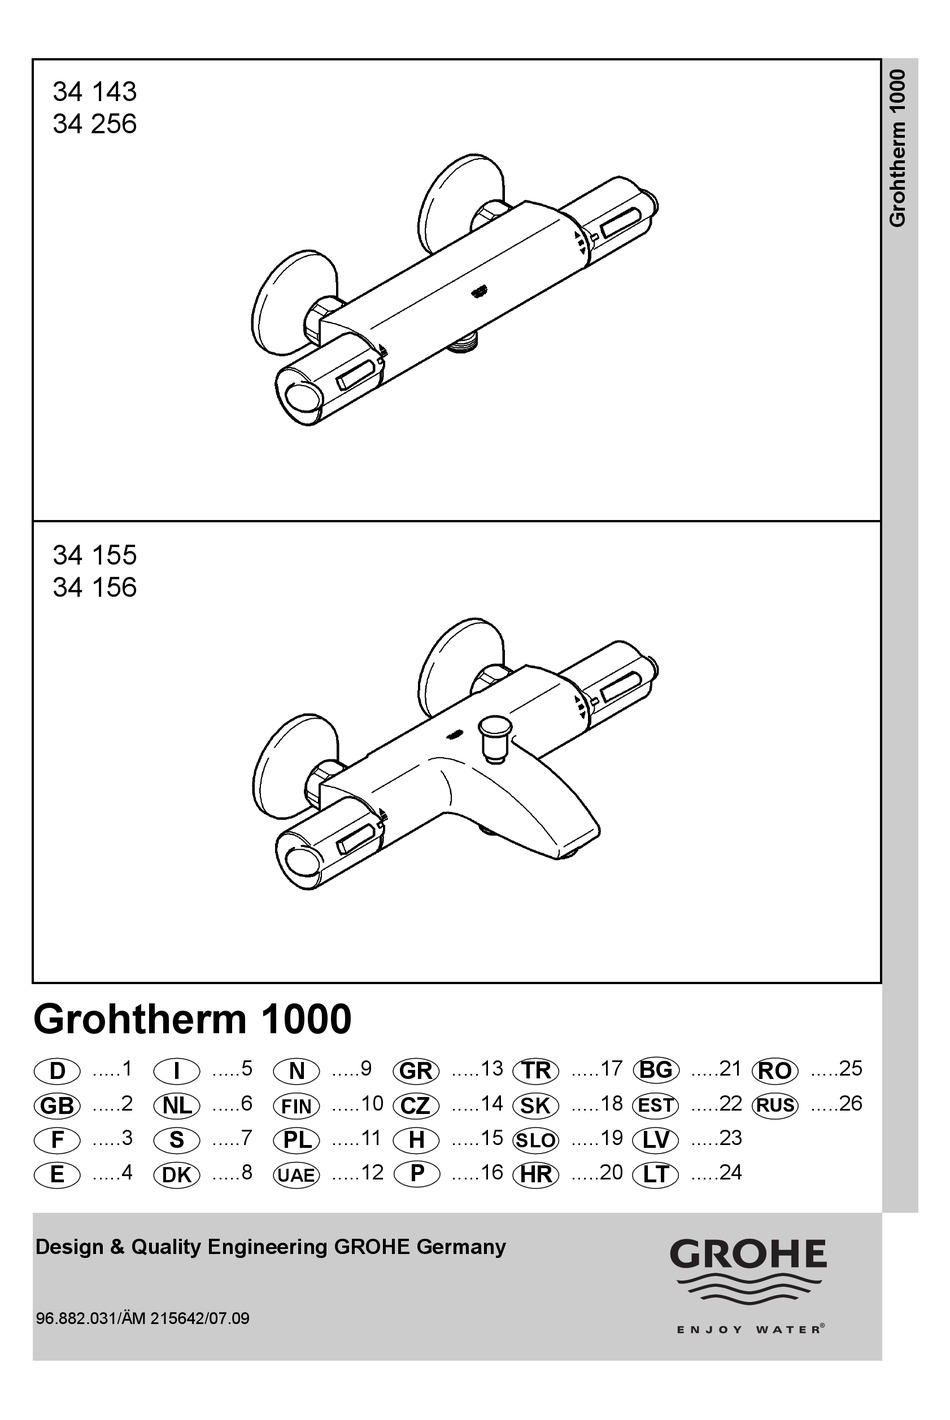 staal Afsnijden perspectief GROHE GROHTHERM 1000 34143 MANUAL Pdf Download | ManualsLib